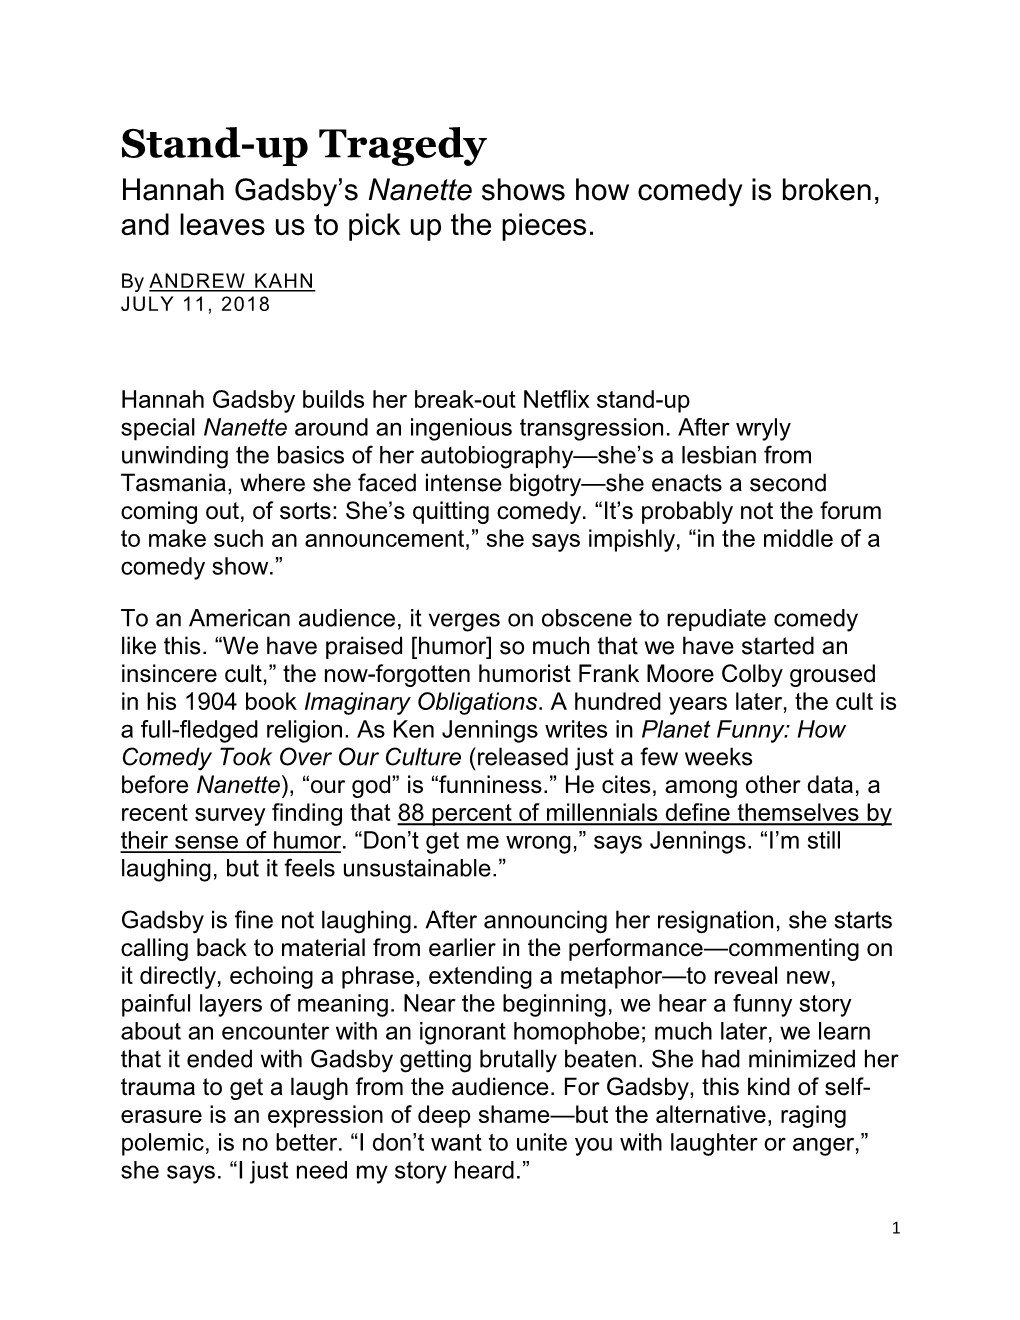 Stand-Up Tragedy Hannah Gadsby’S Nanette Shows How Comedy Is Broken, and Leaves Us to Pick up the Pieces